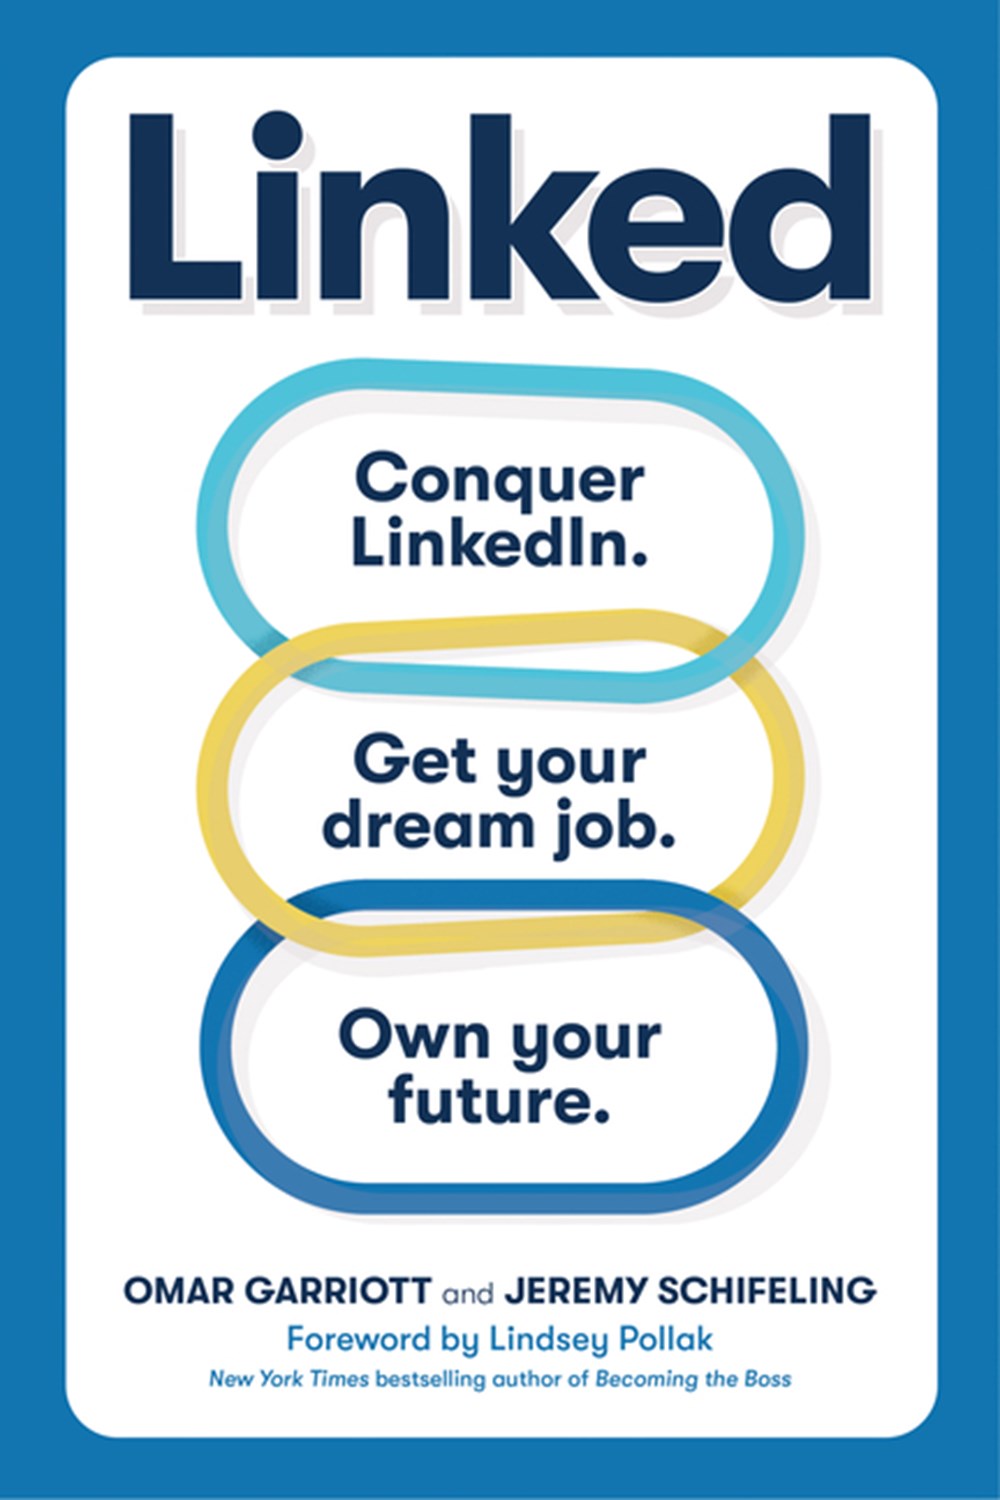 Linked Conquer Linkedin. Get the Job. Own Your Future.